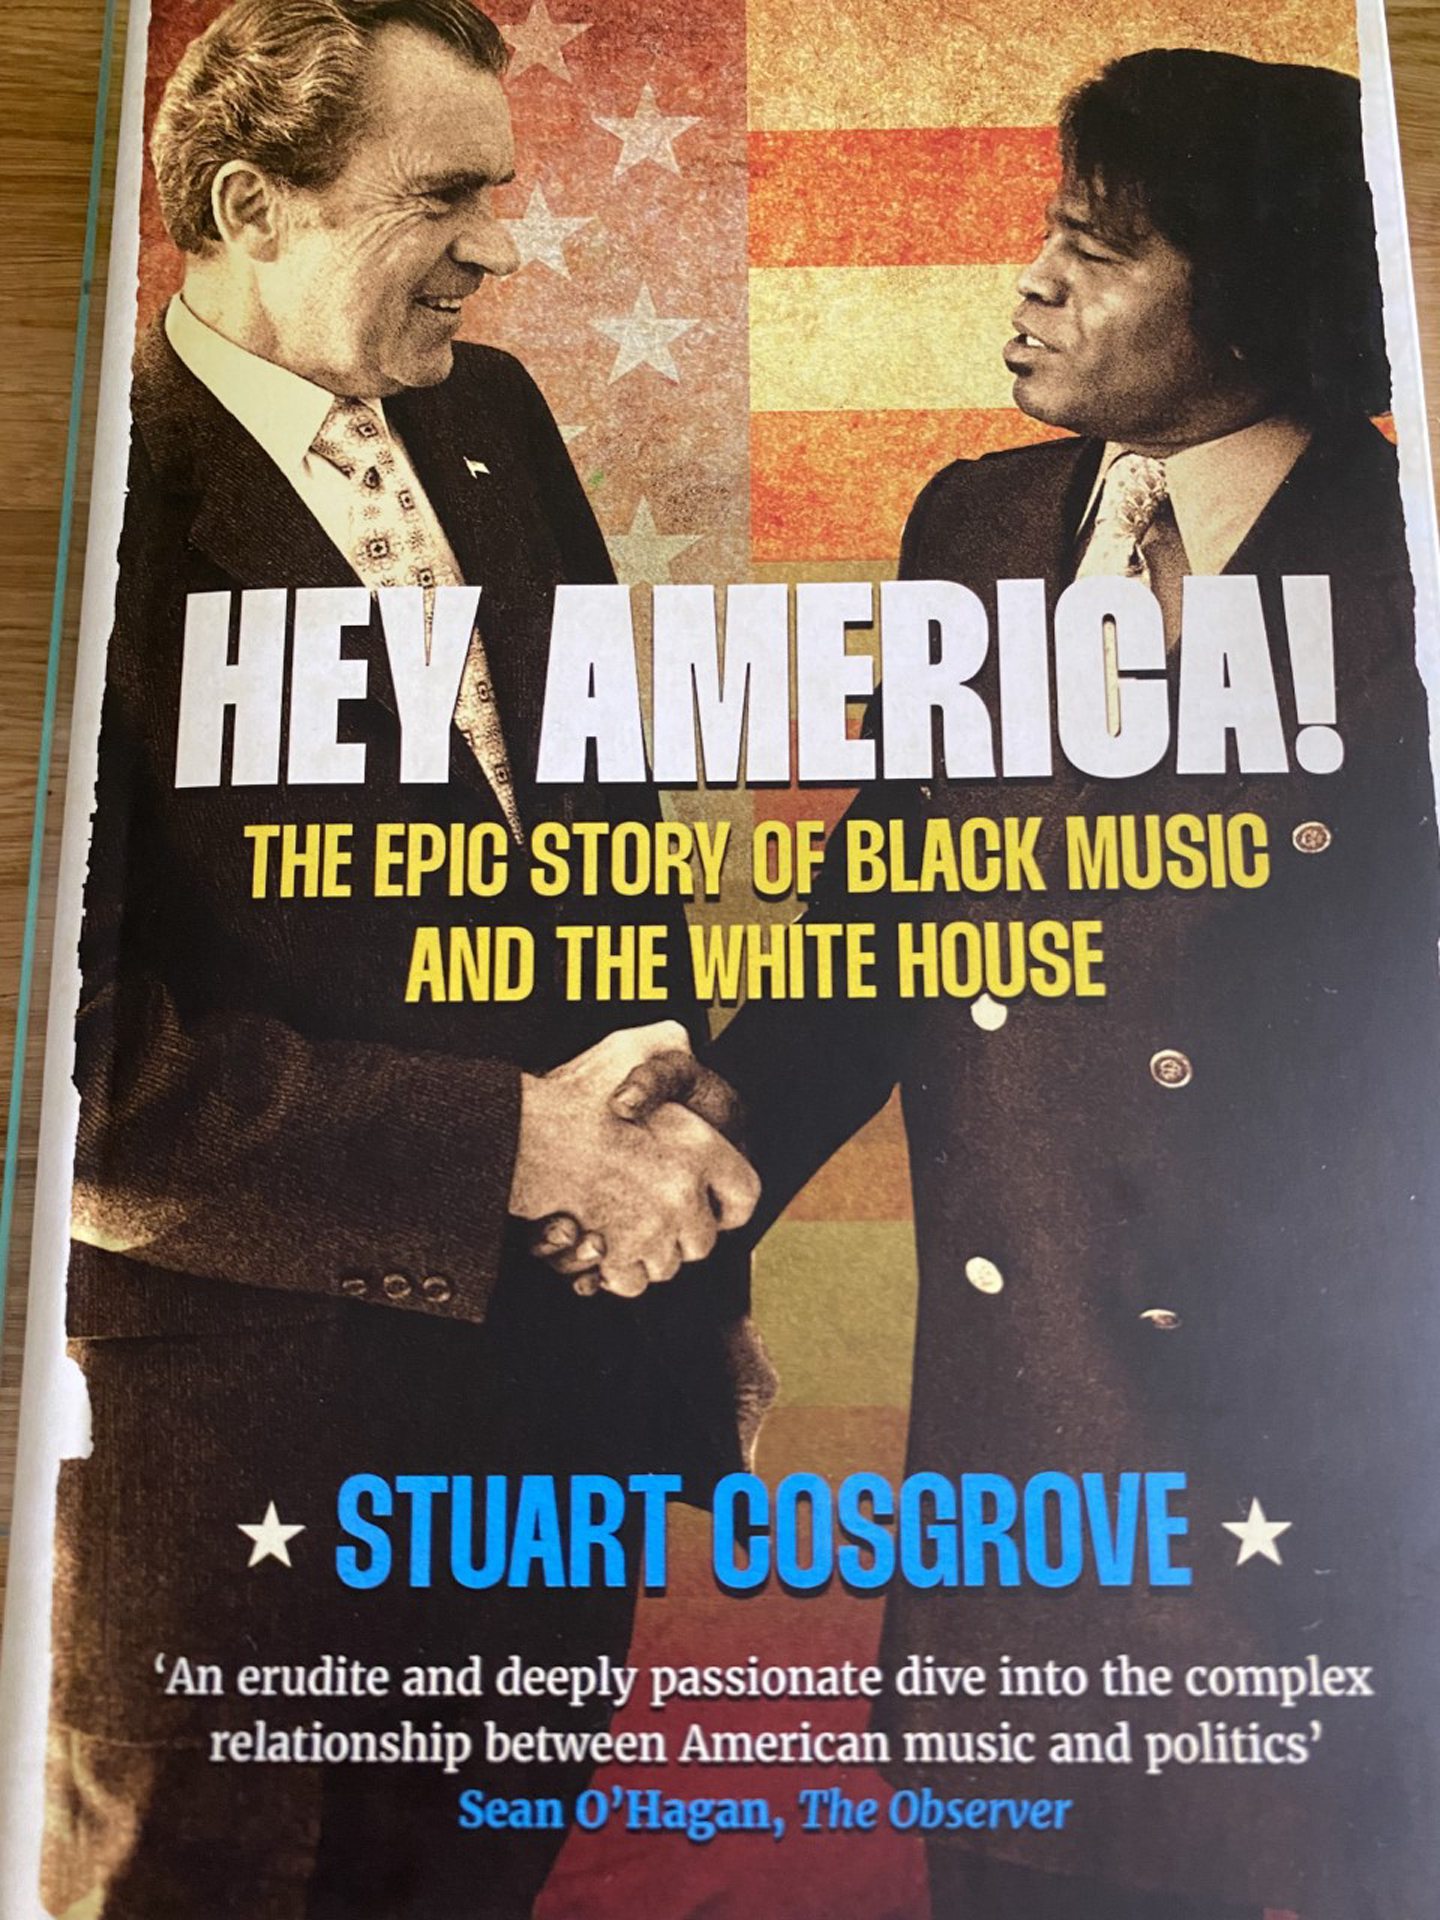 Stuart Cosgrove's new book, Hey America, looks at links between black music and the White House.